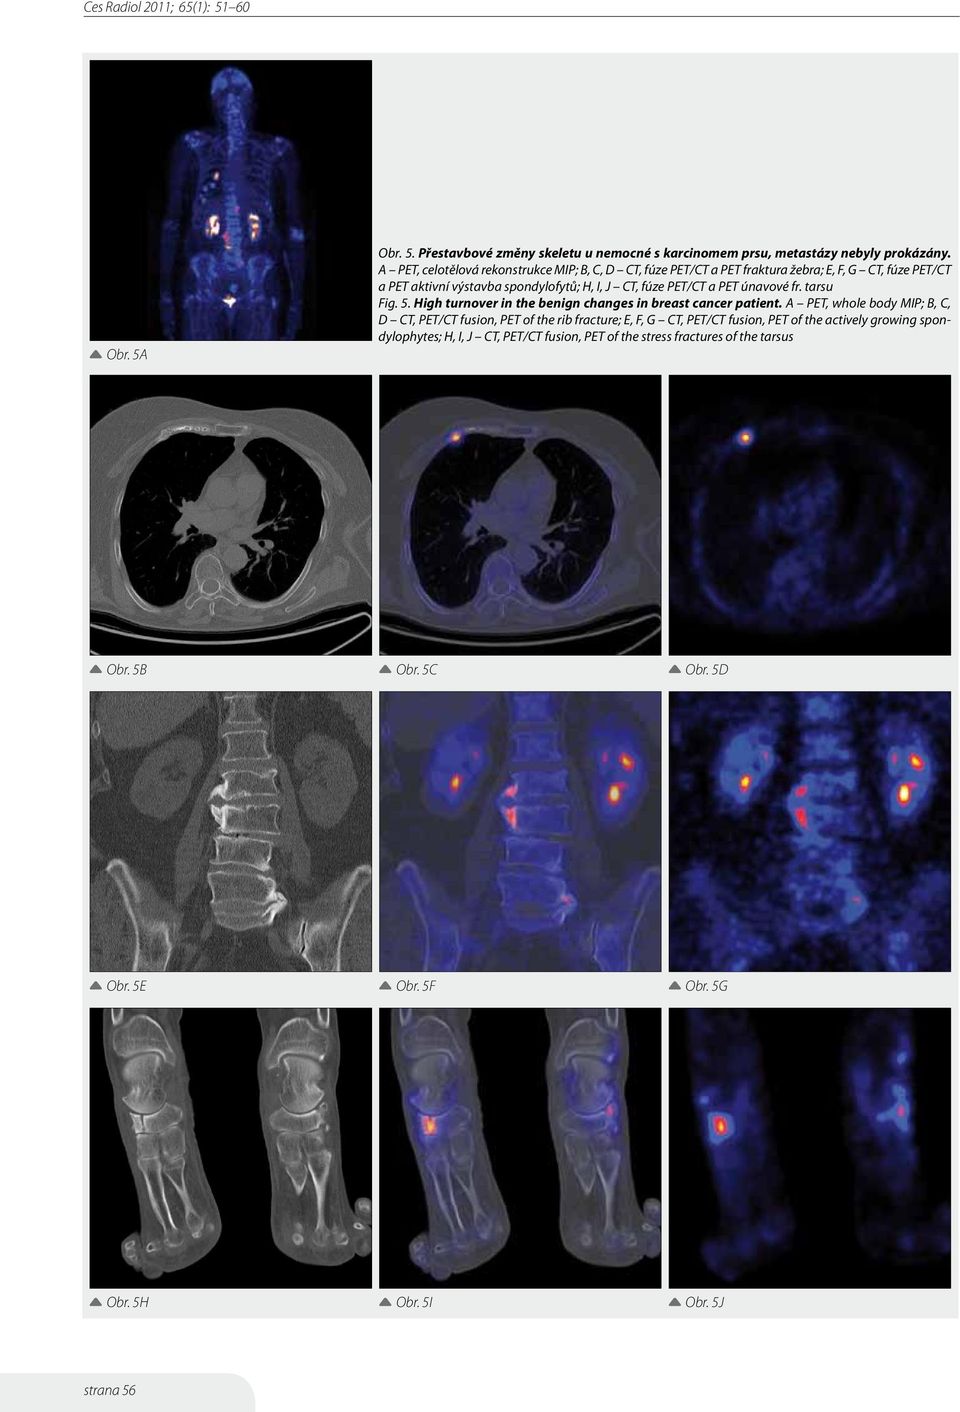 PET/CT a PET únavové fr. tarsu Fig. 5. High turnover in the benign changes in breast cancer patient.